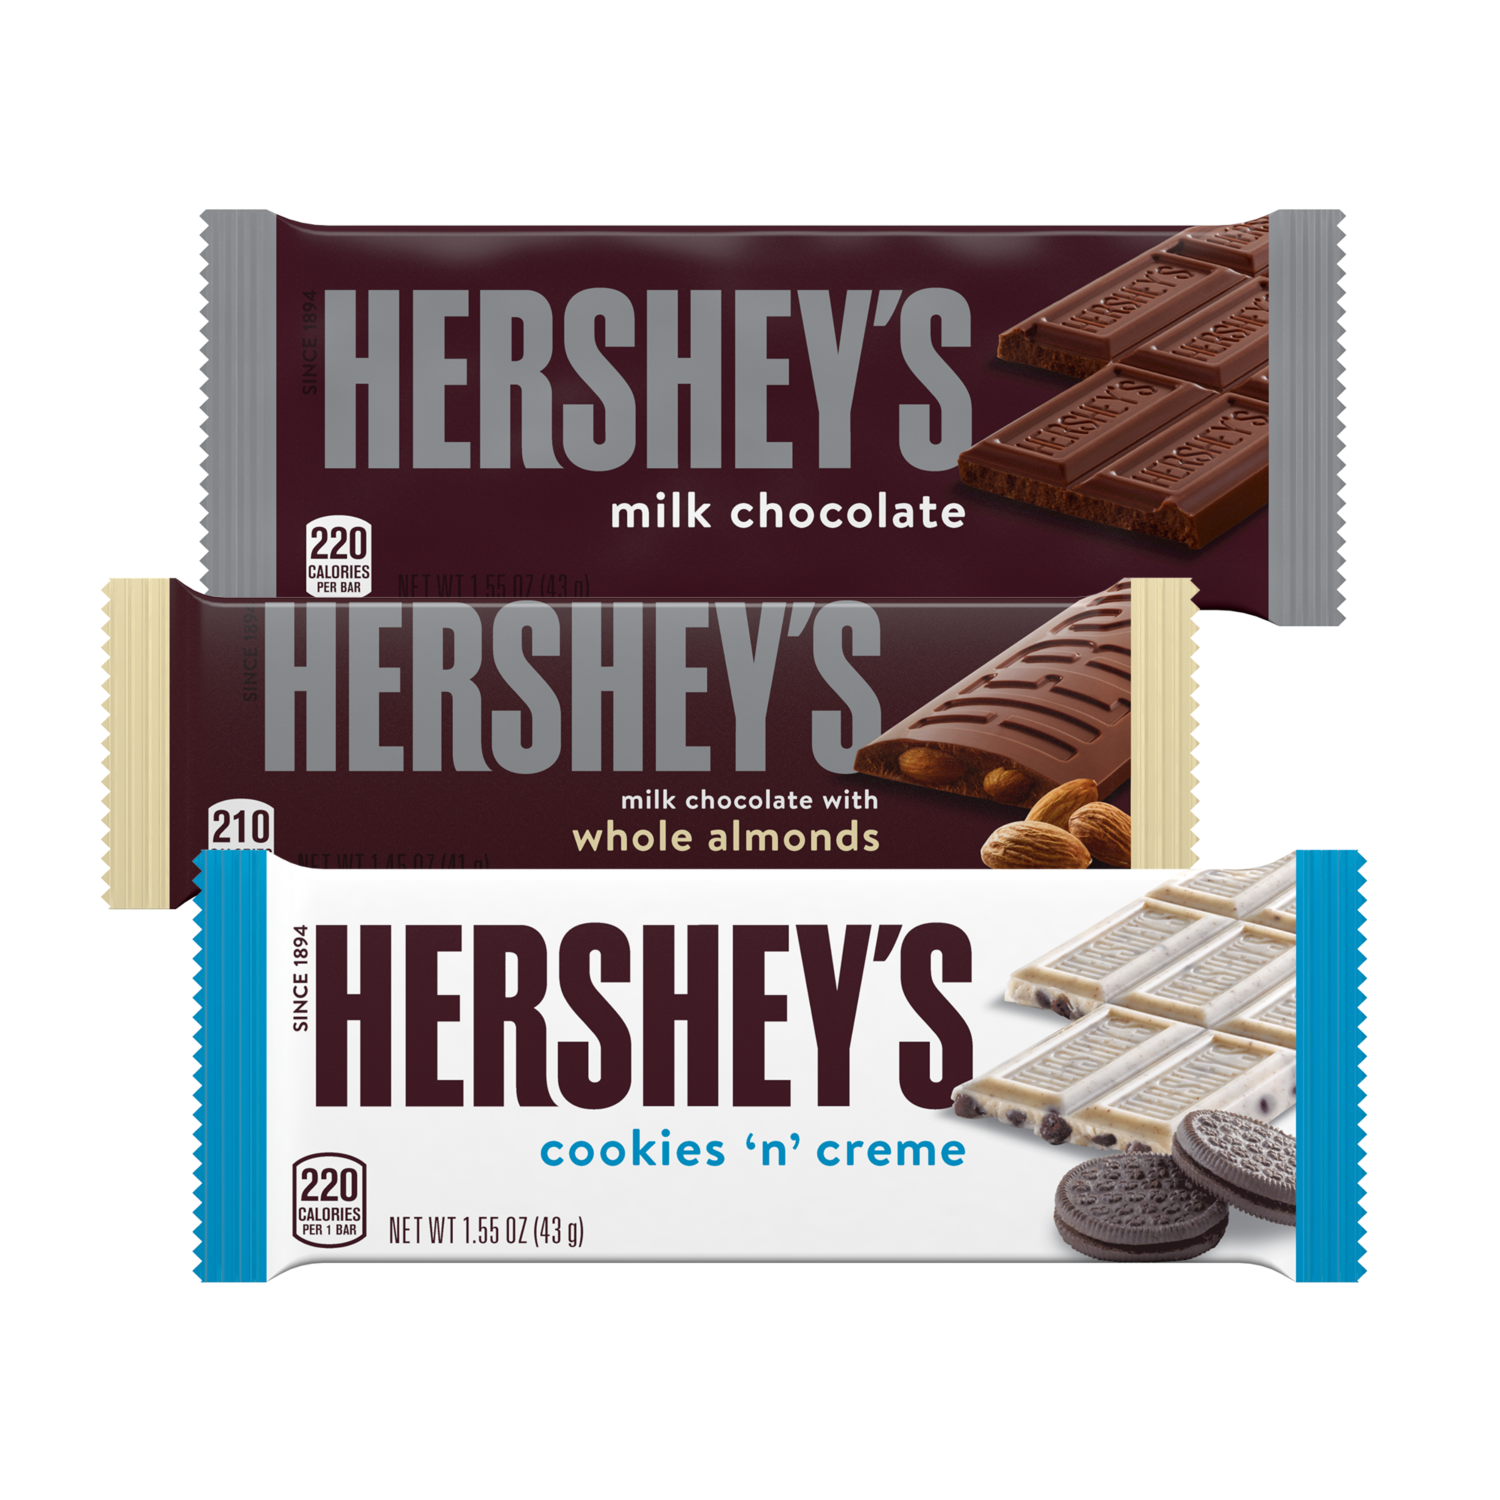 HERSHEY'S Variety Pack Candy Bars, 27.3 oz box, 18 count - Front of Package